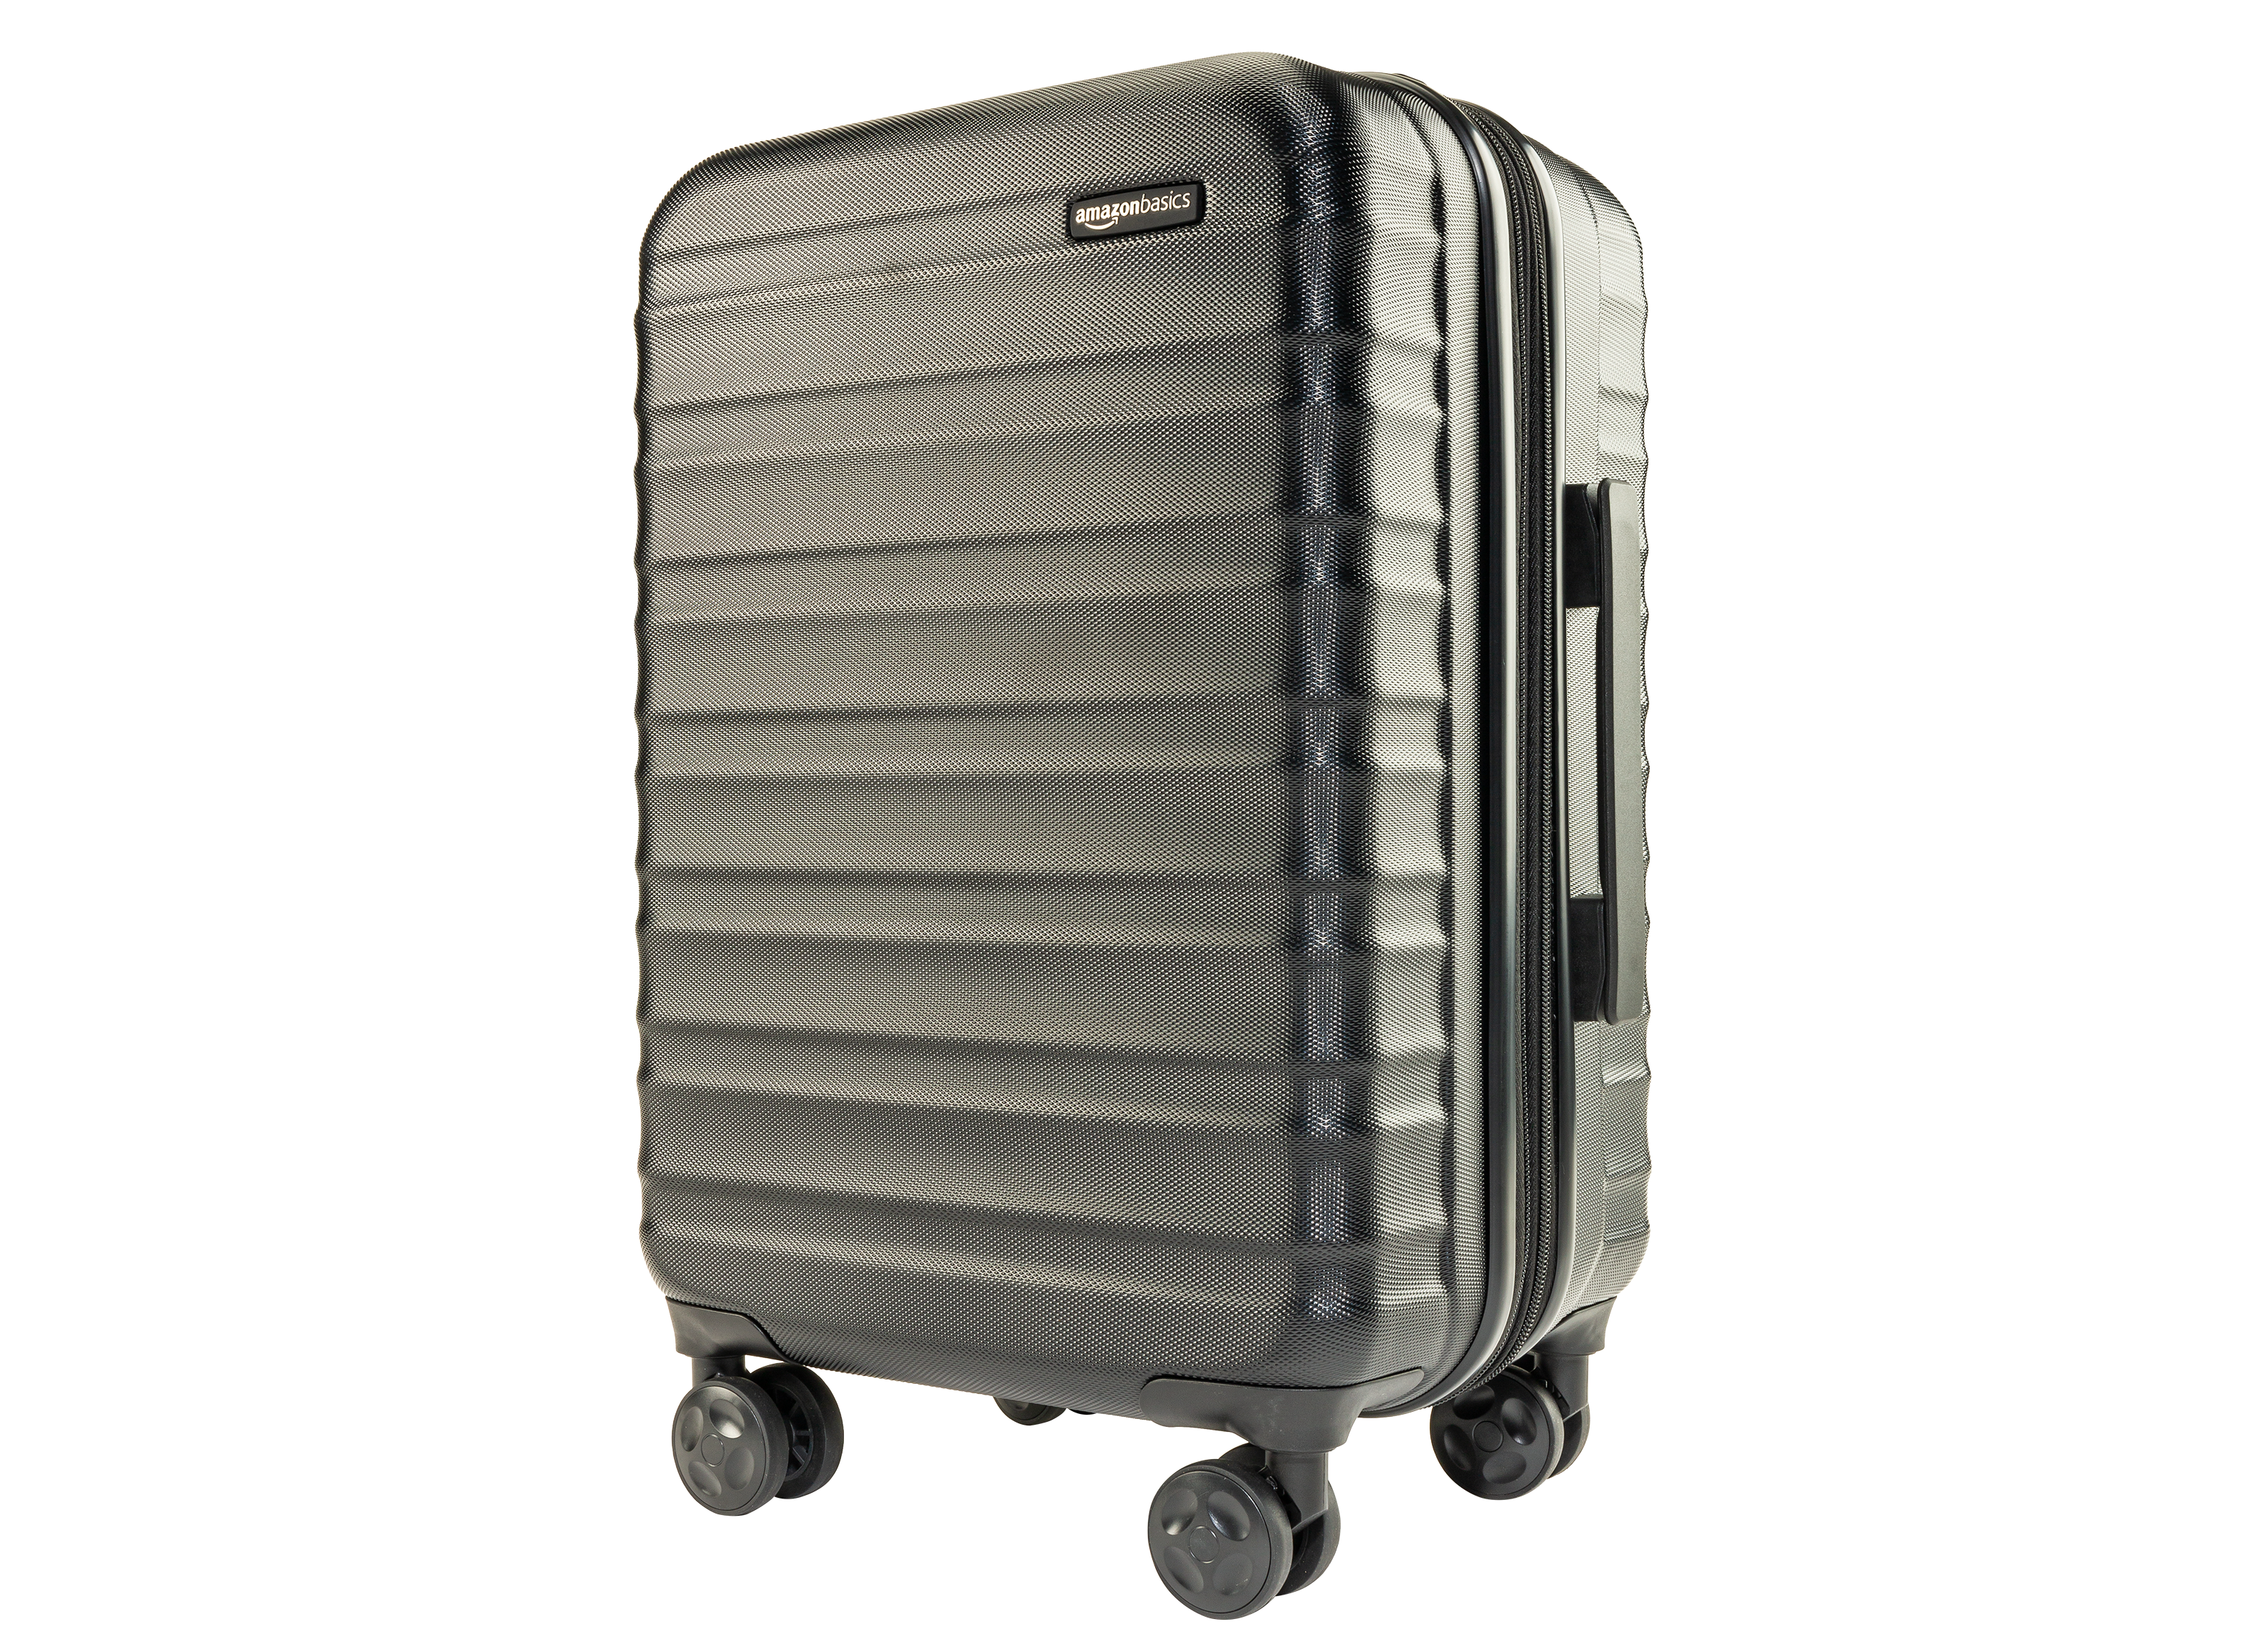 Basics 21-Inch Hardside Spinner Luggage Review - Consumer